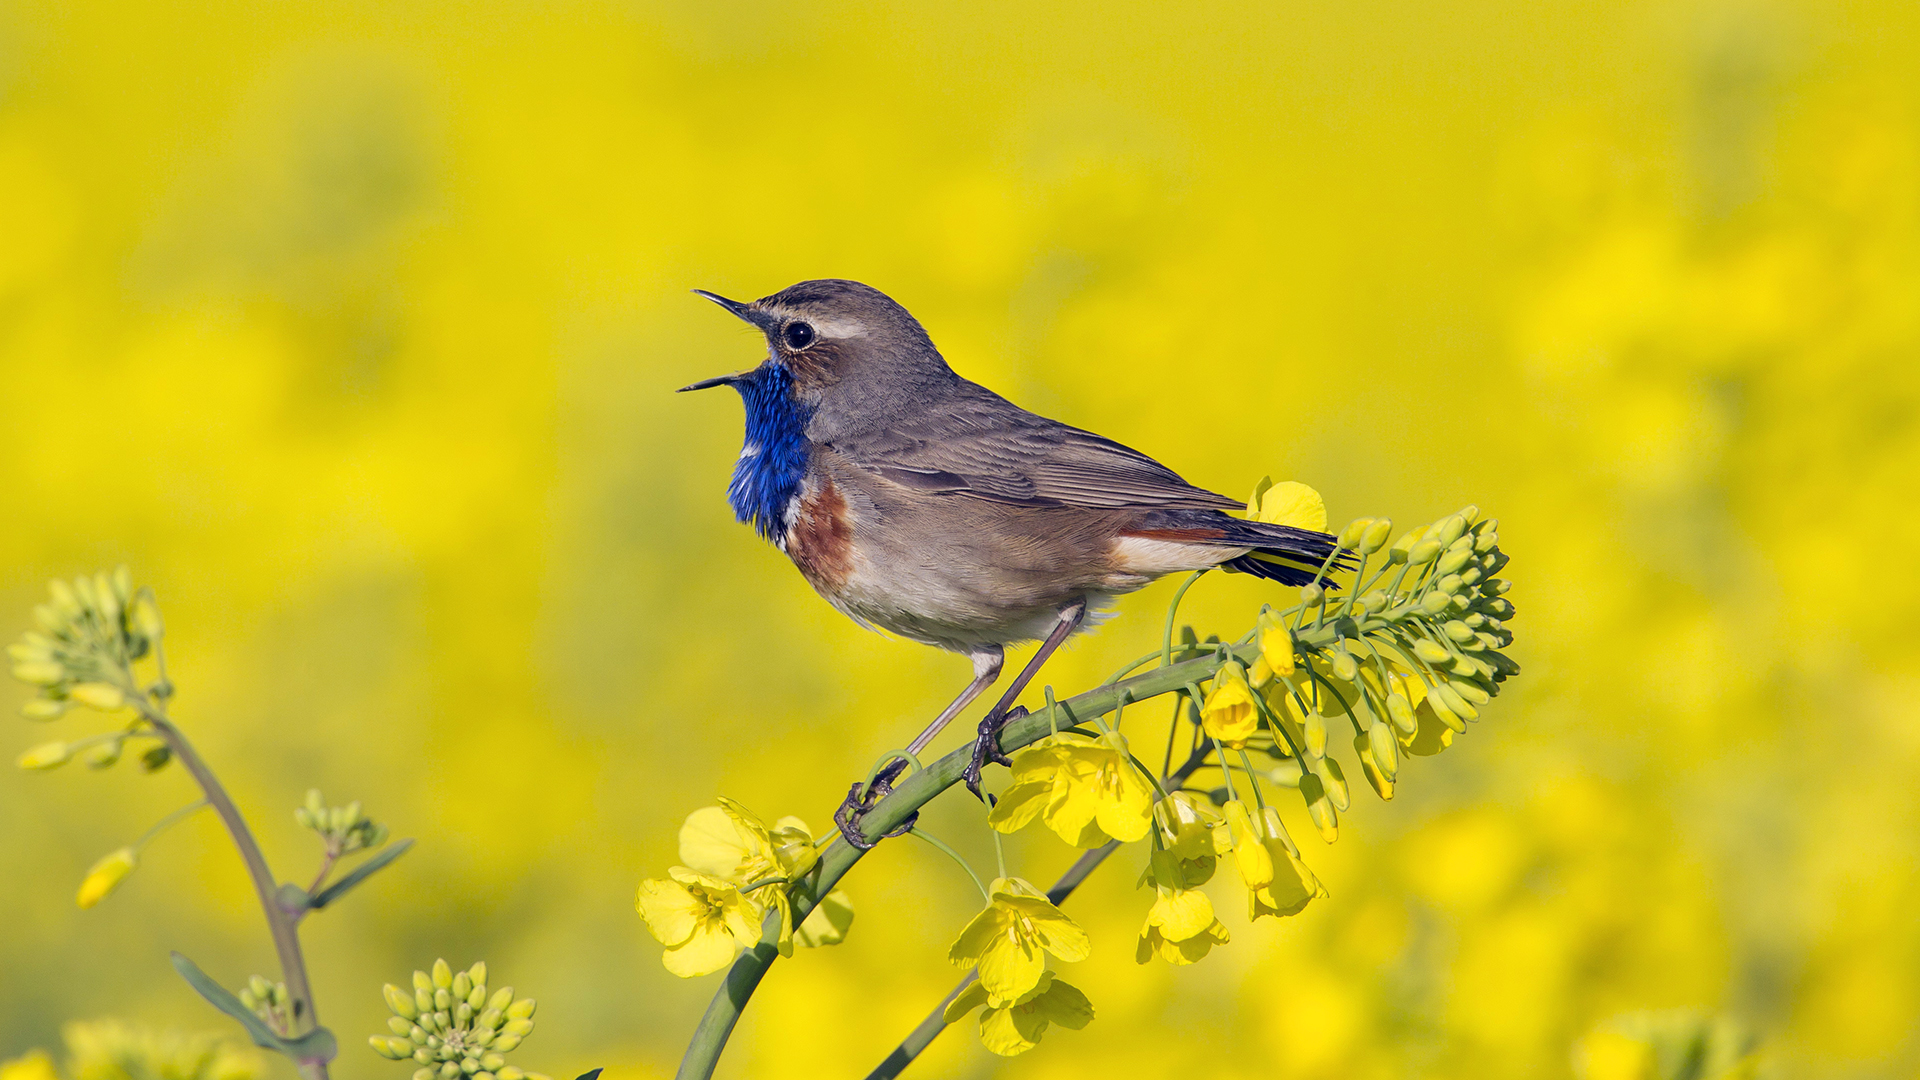 White-spotted bluethroat (Luscinia svecica cyanecula) male calling from flower in rape field in spring